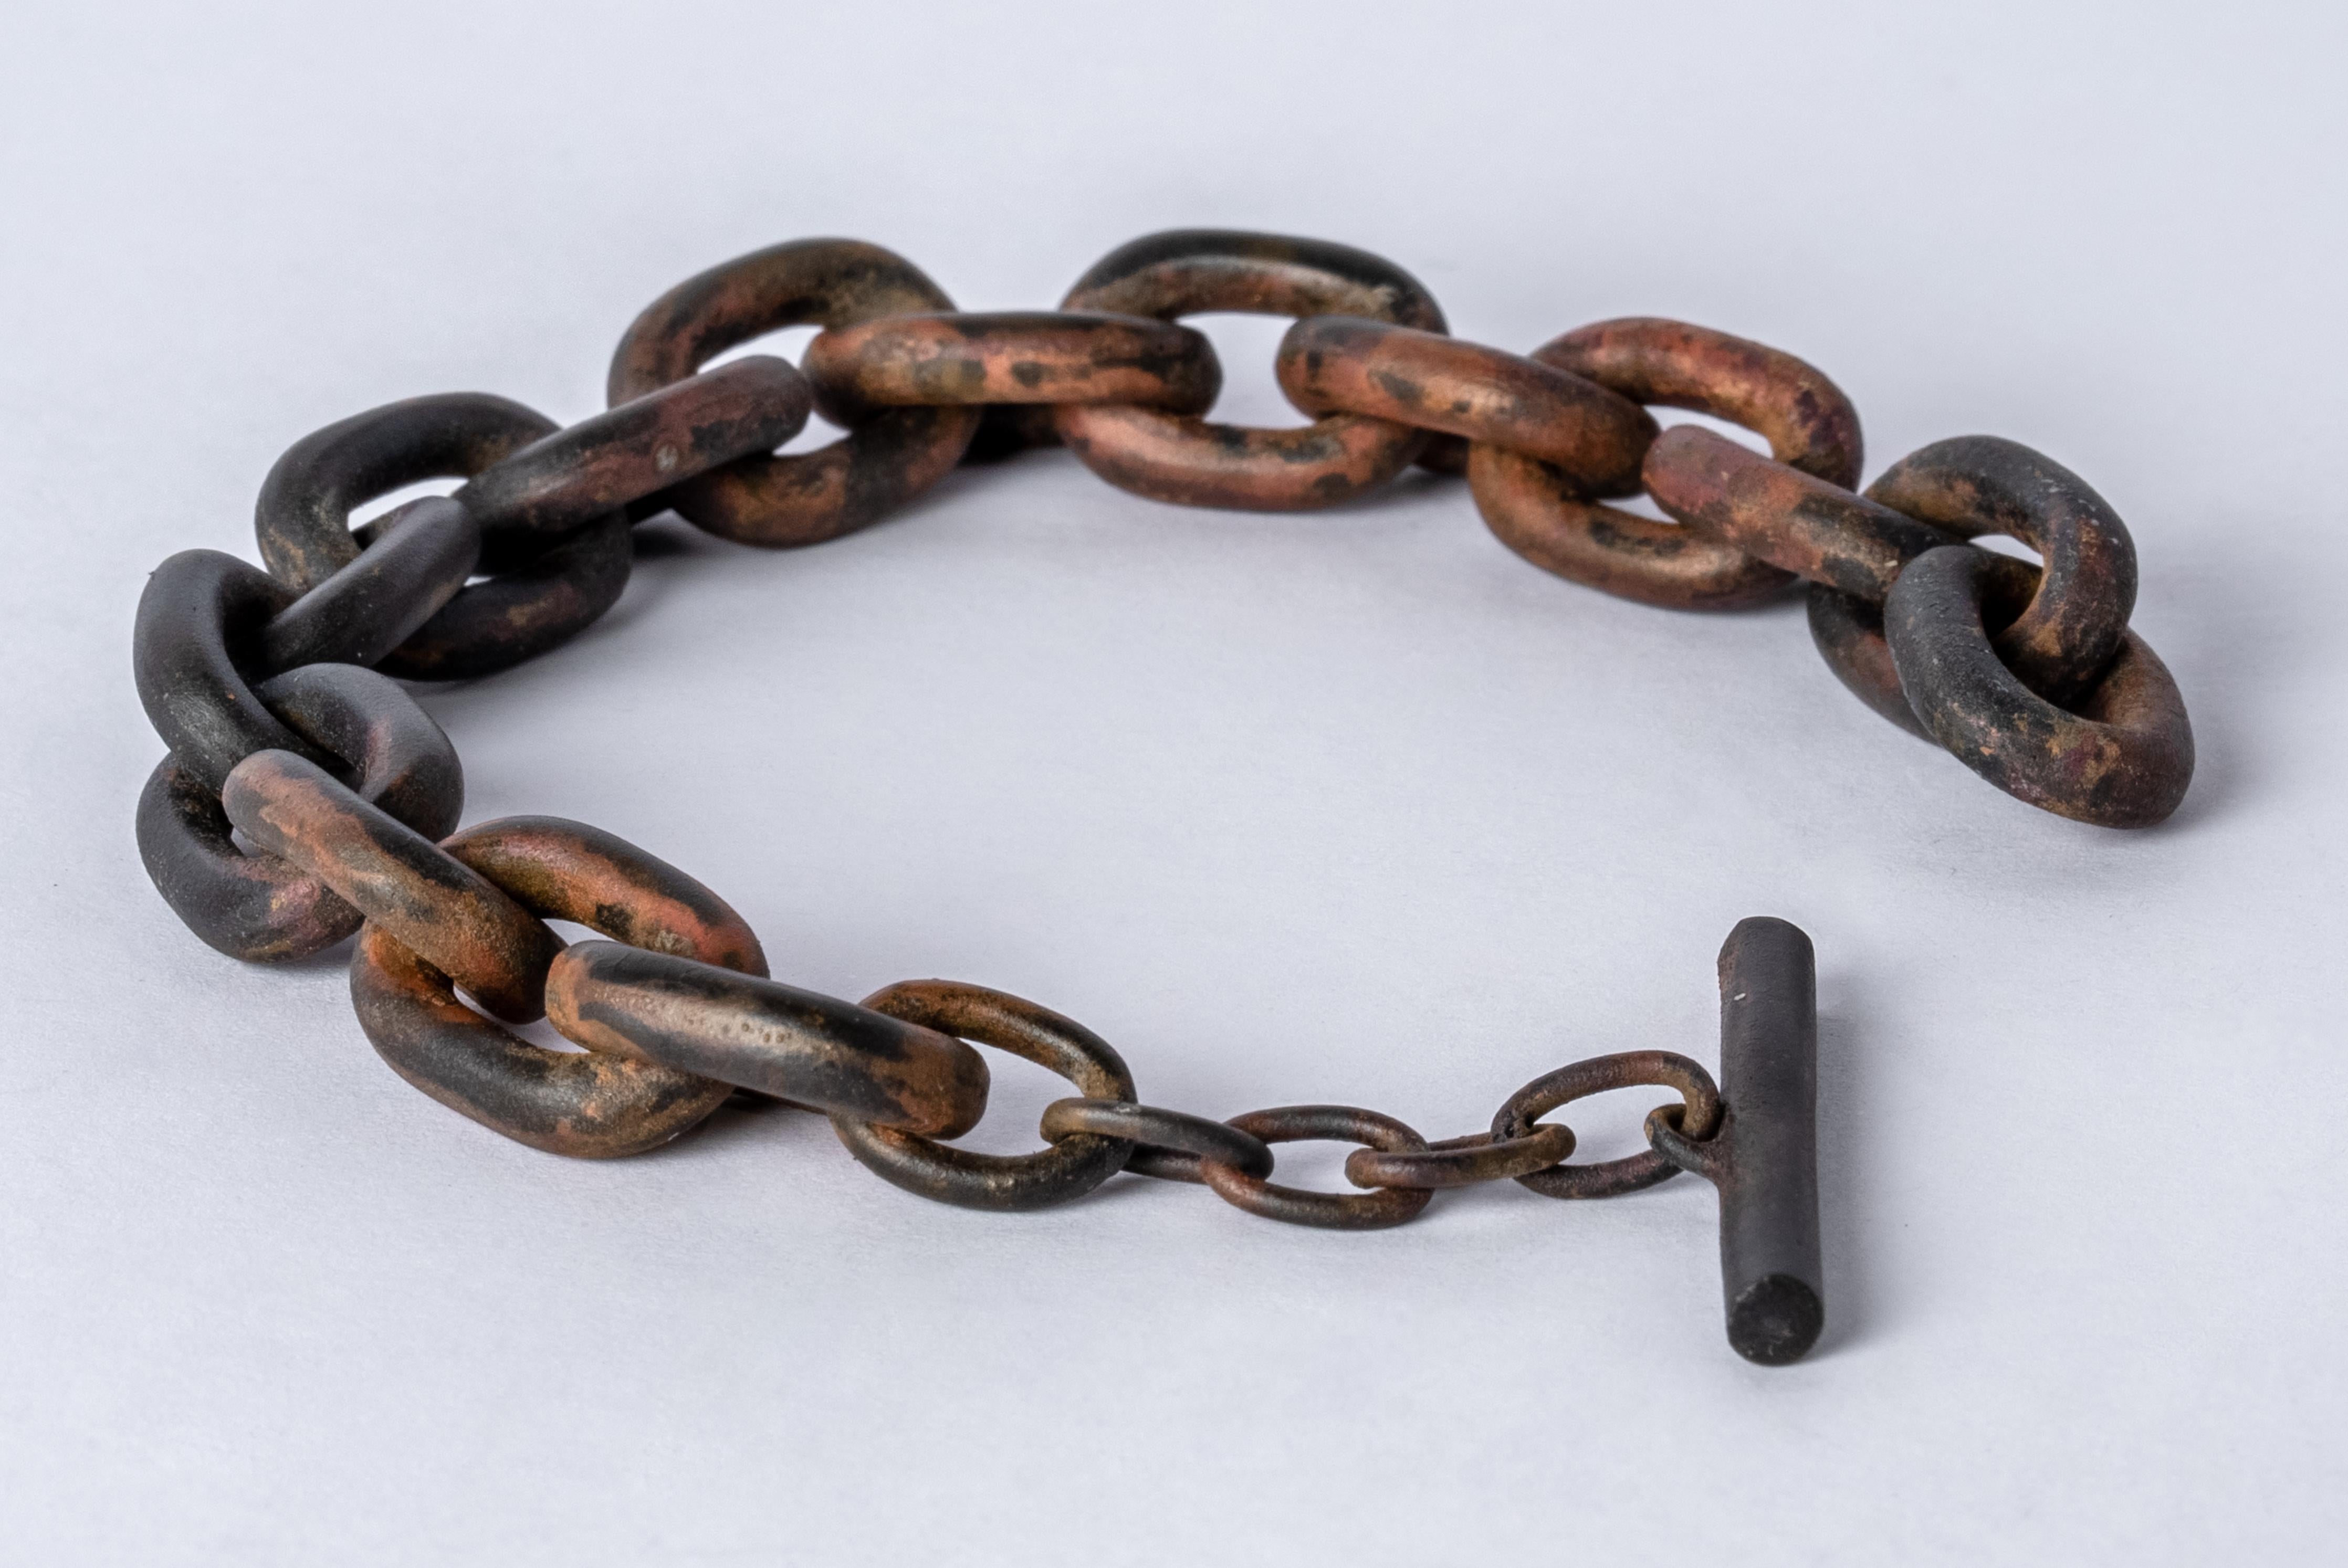 Bracelet in burned brass. This patina occurs from within, no chemical was added to the surface.
Dimensions :
Chain link size (L × H): 20 mm × 14 mm
Toggle length: 30 mm